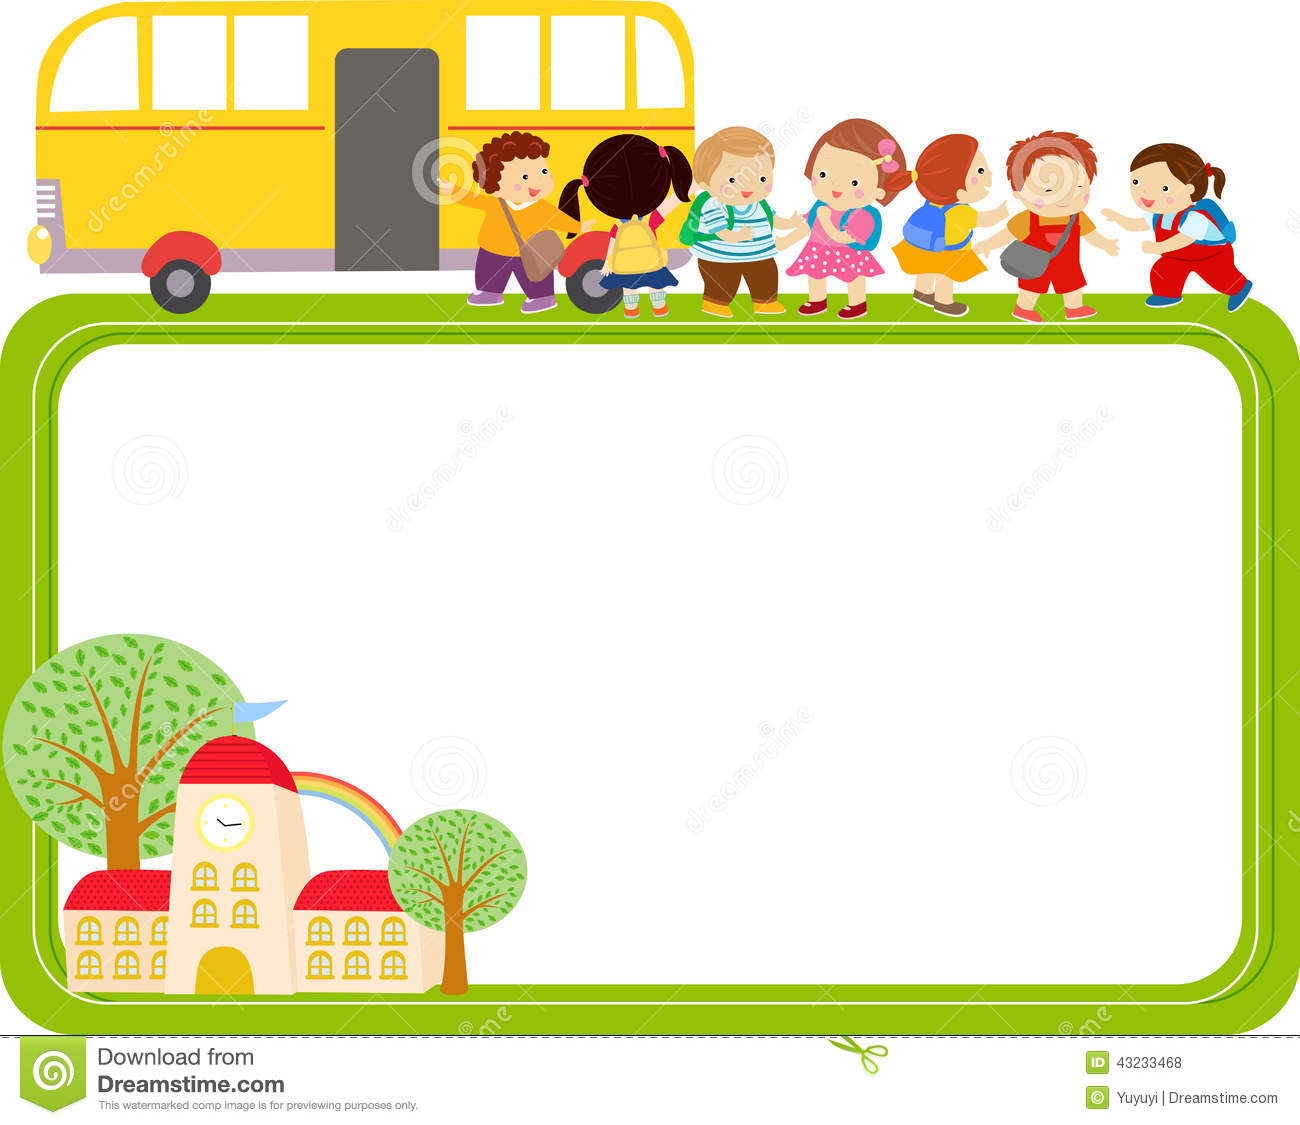 Boarder clipart cute.  collection of school